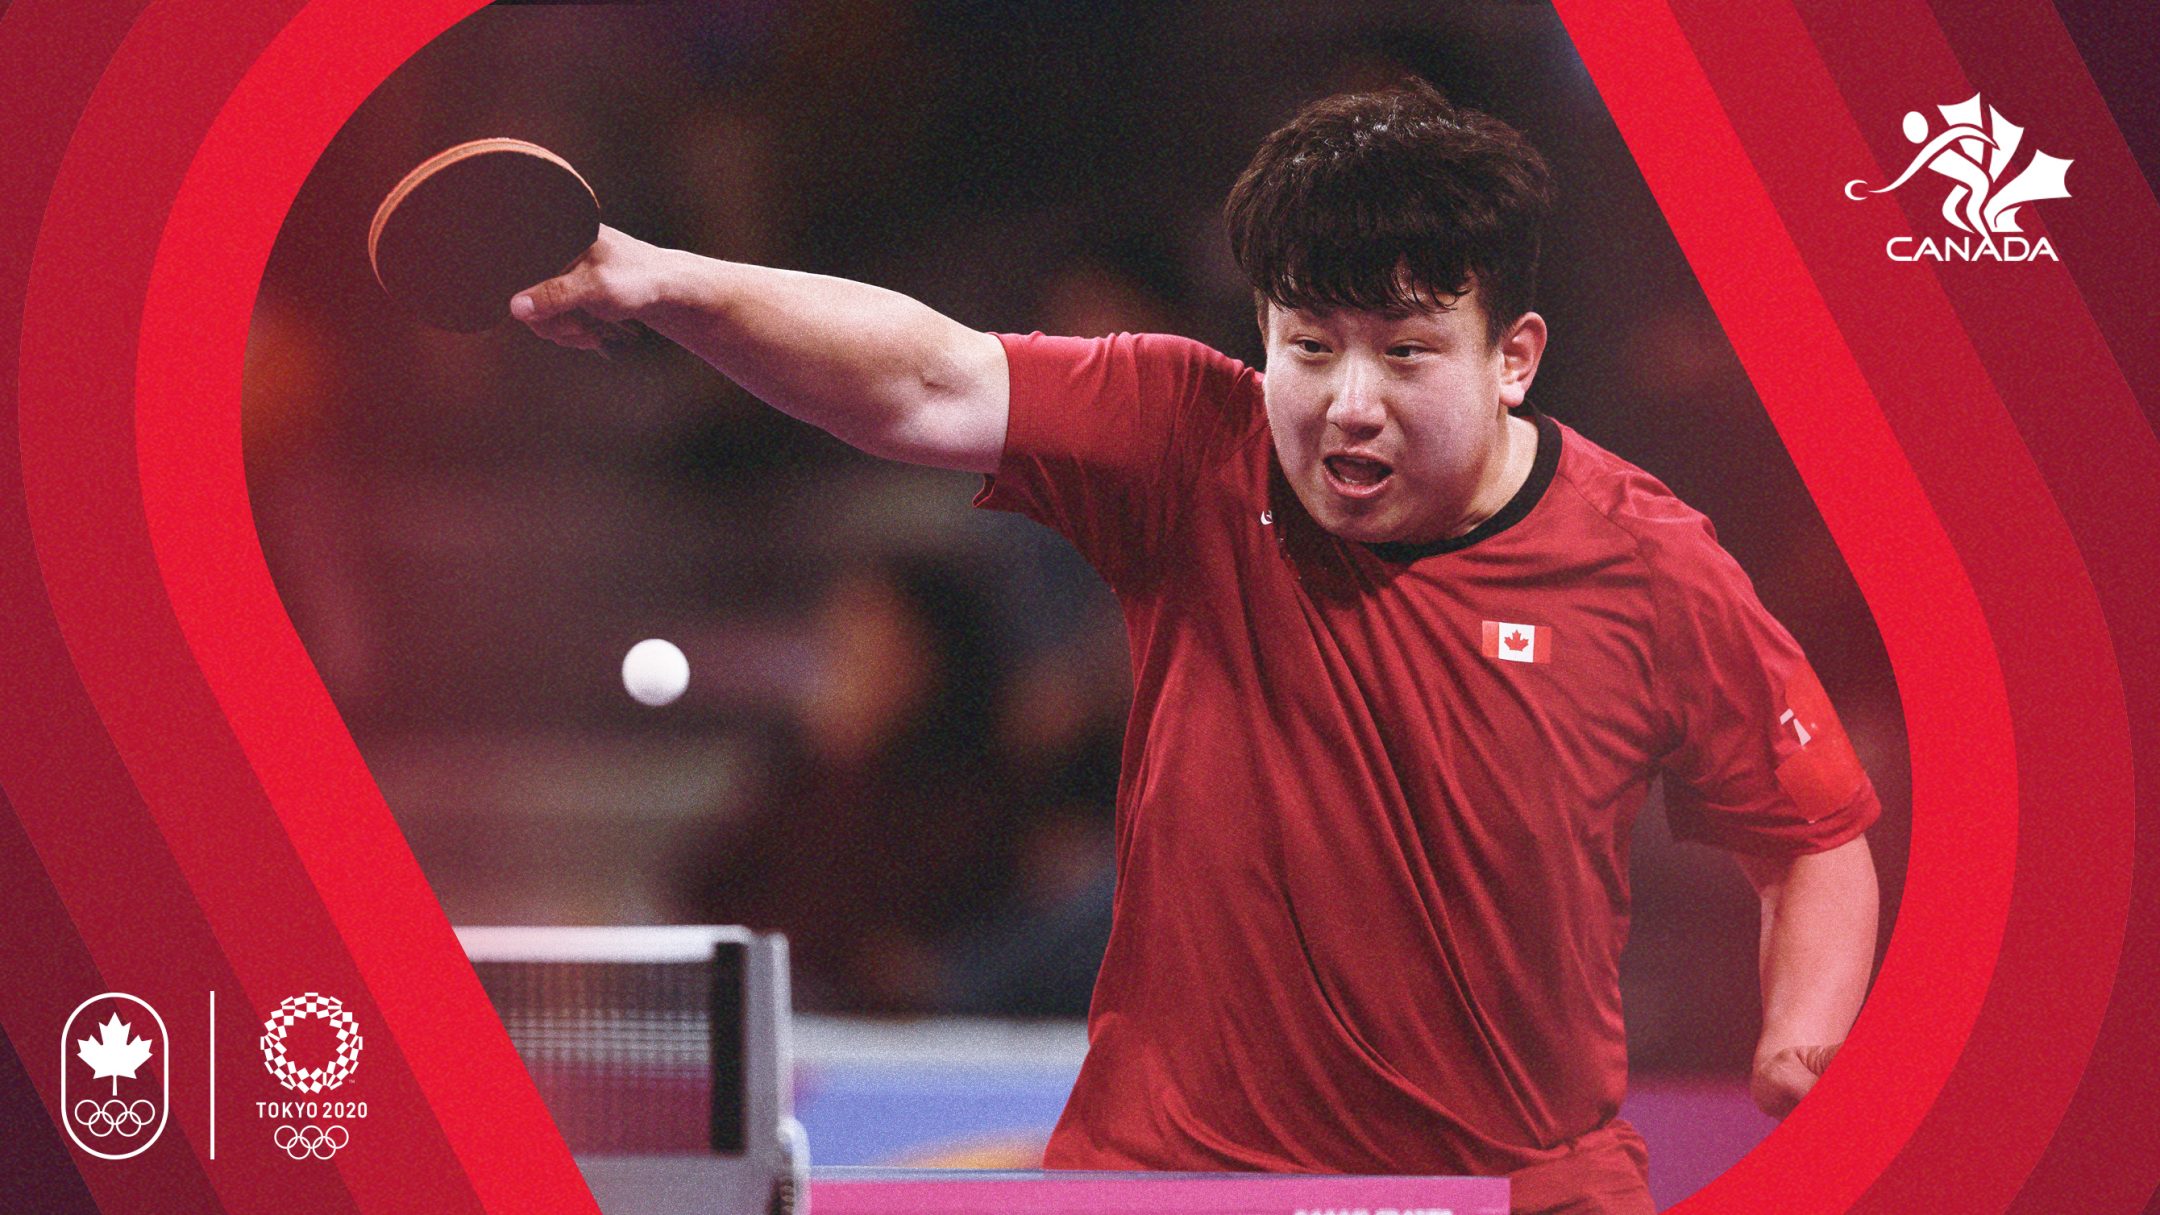 Three table tennis players nominated to Team Canada for Tokyo 2020 - Team  Canada - Official Olympic Team Website